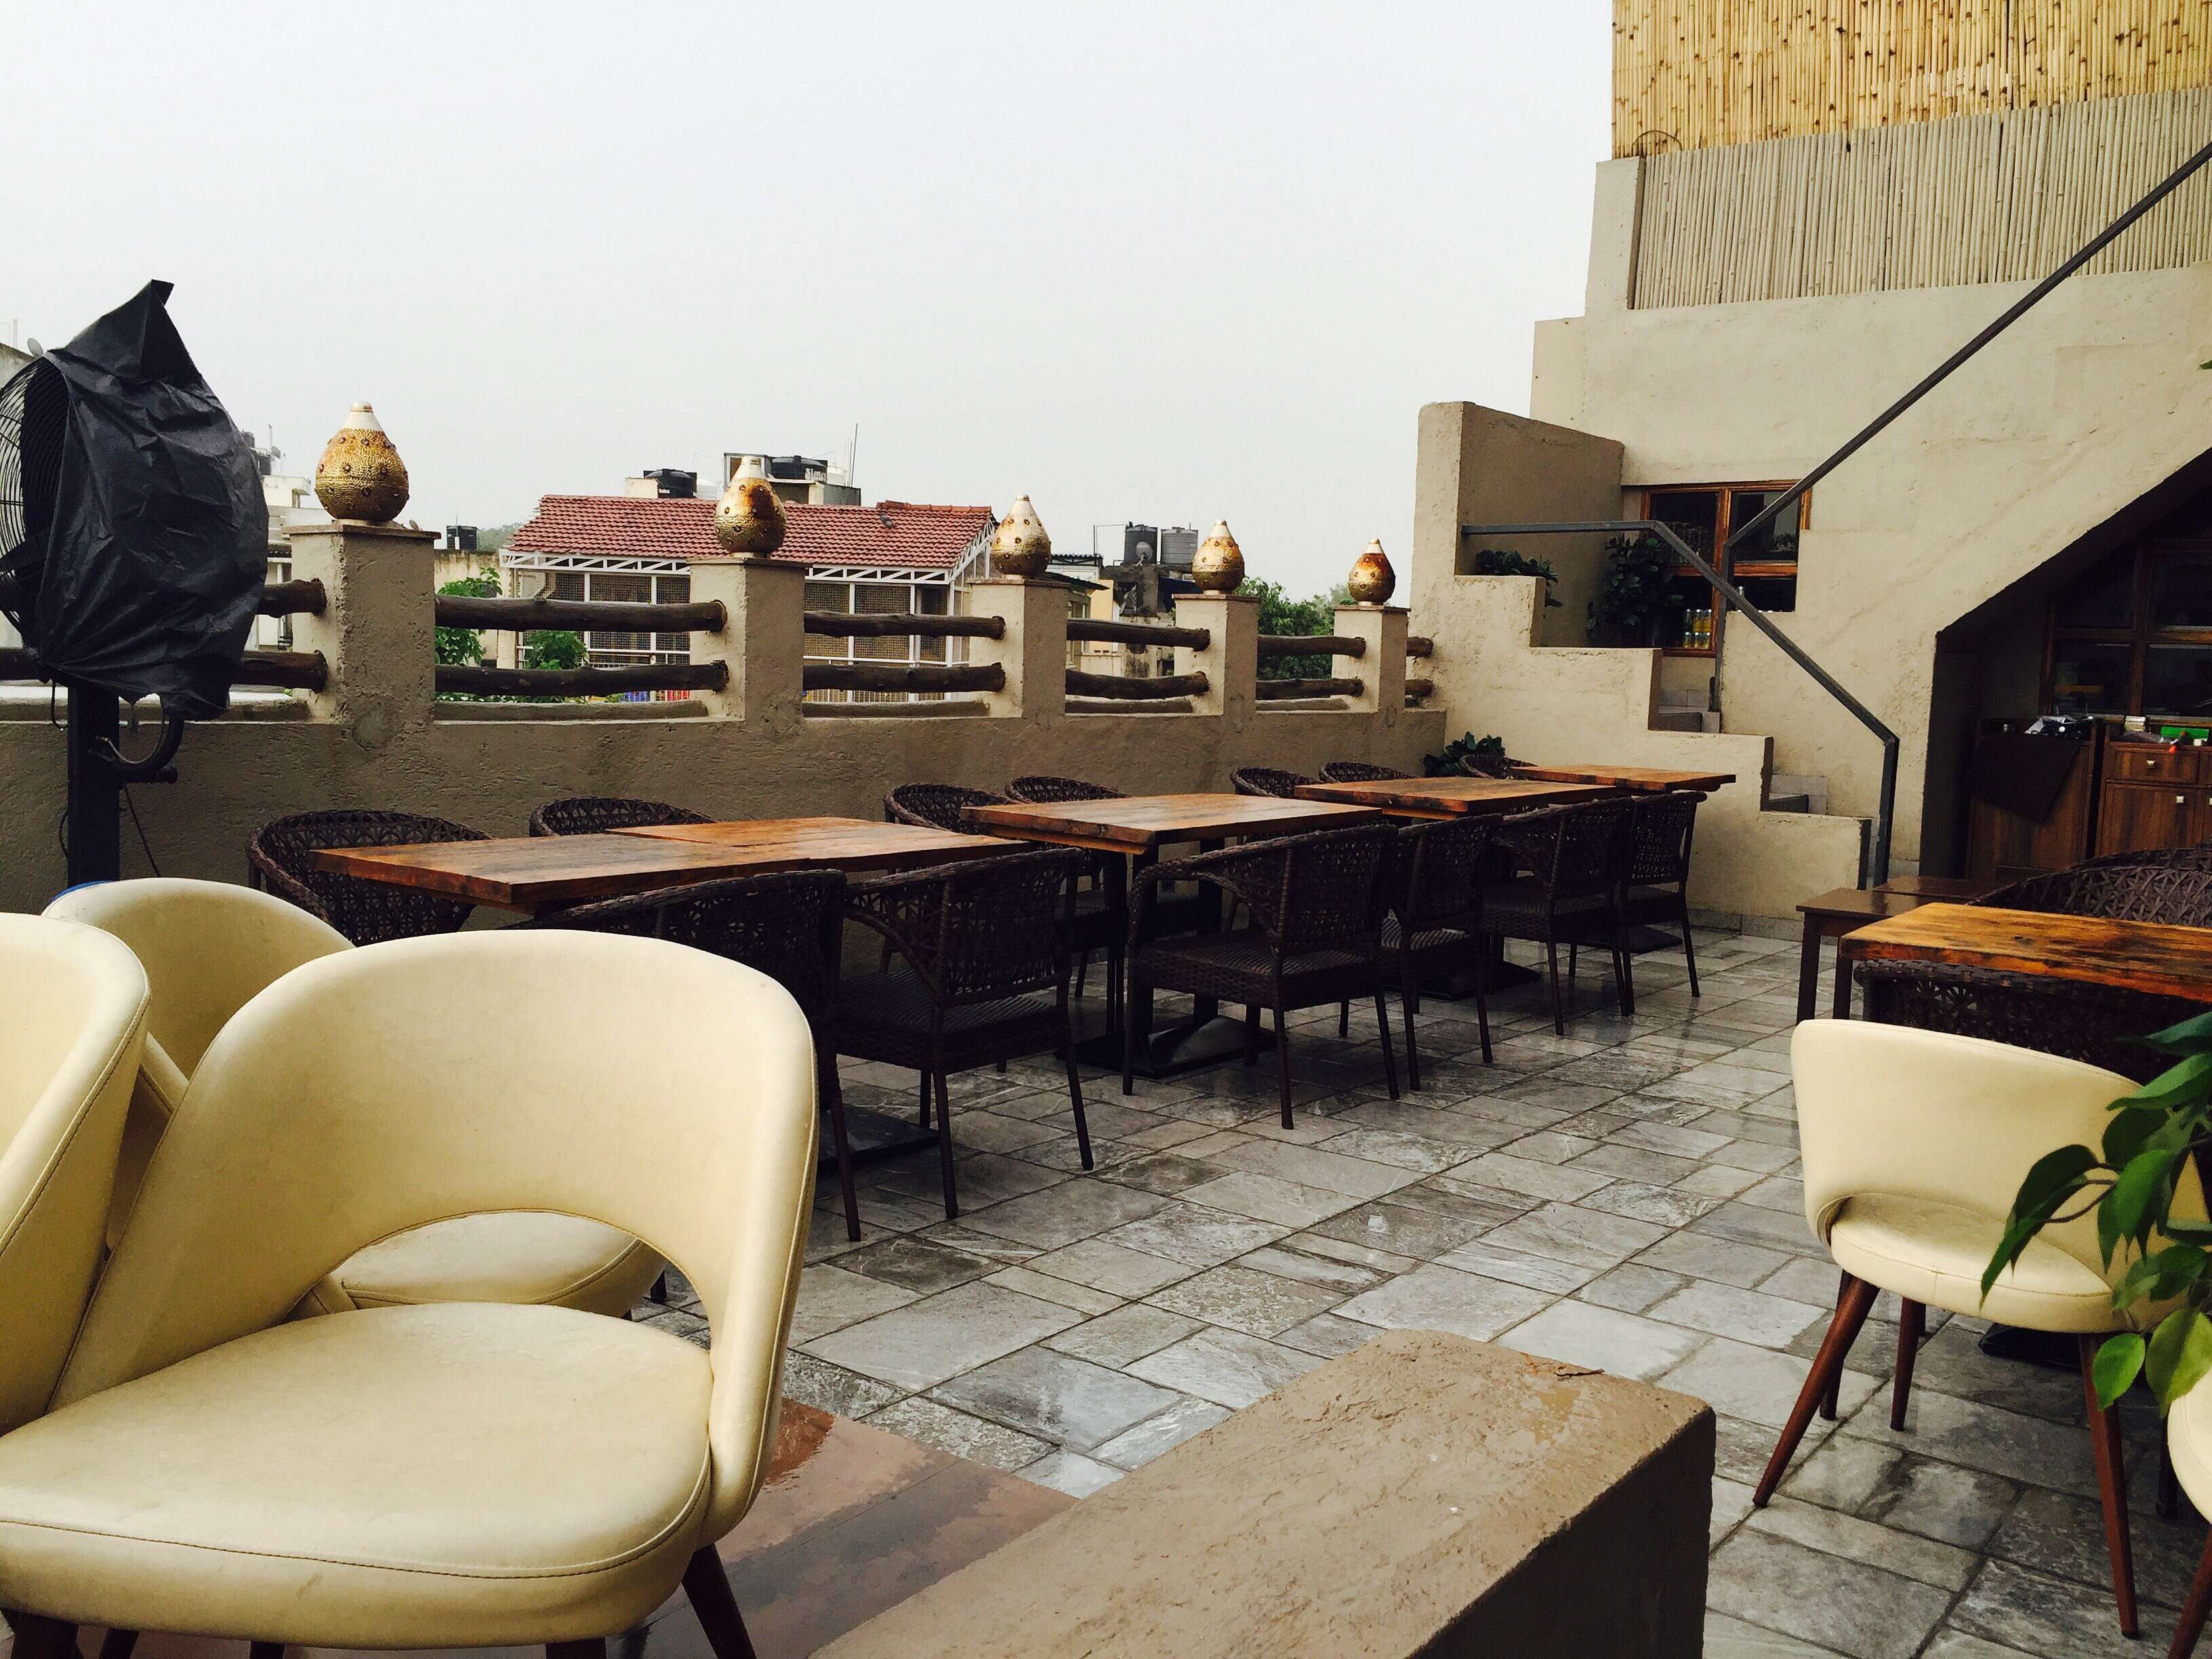 Laidback Cafe in Greater Kailash 1, Delhi